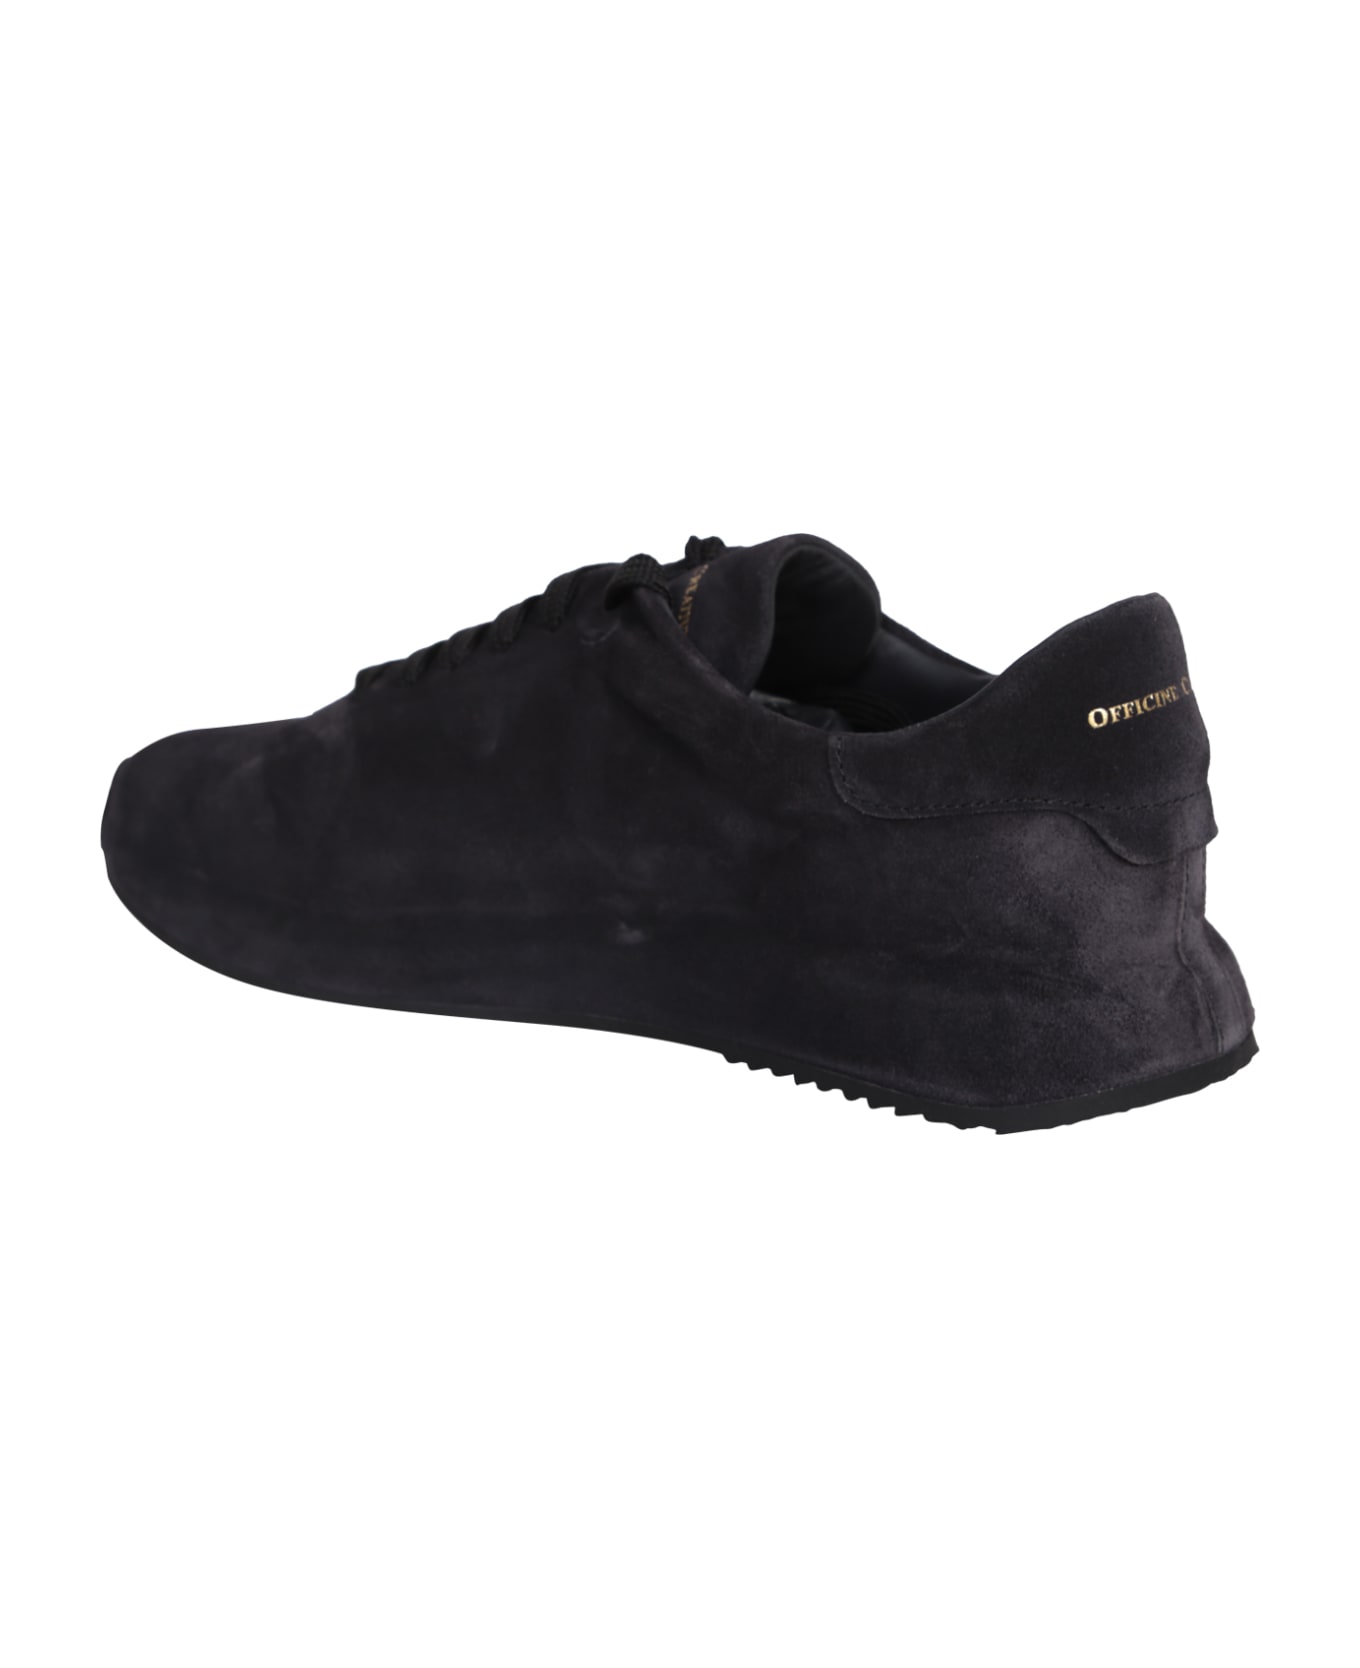 Officine Creative Race Sneakers By Officine Creative With A Contemporary Design - Black スニーカー